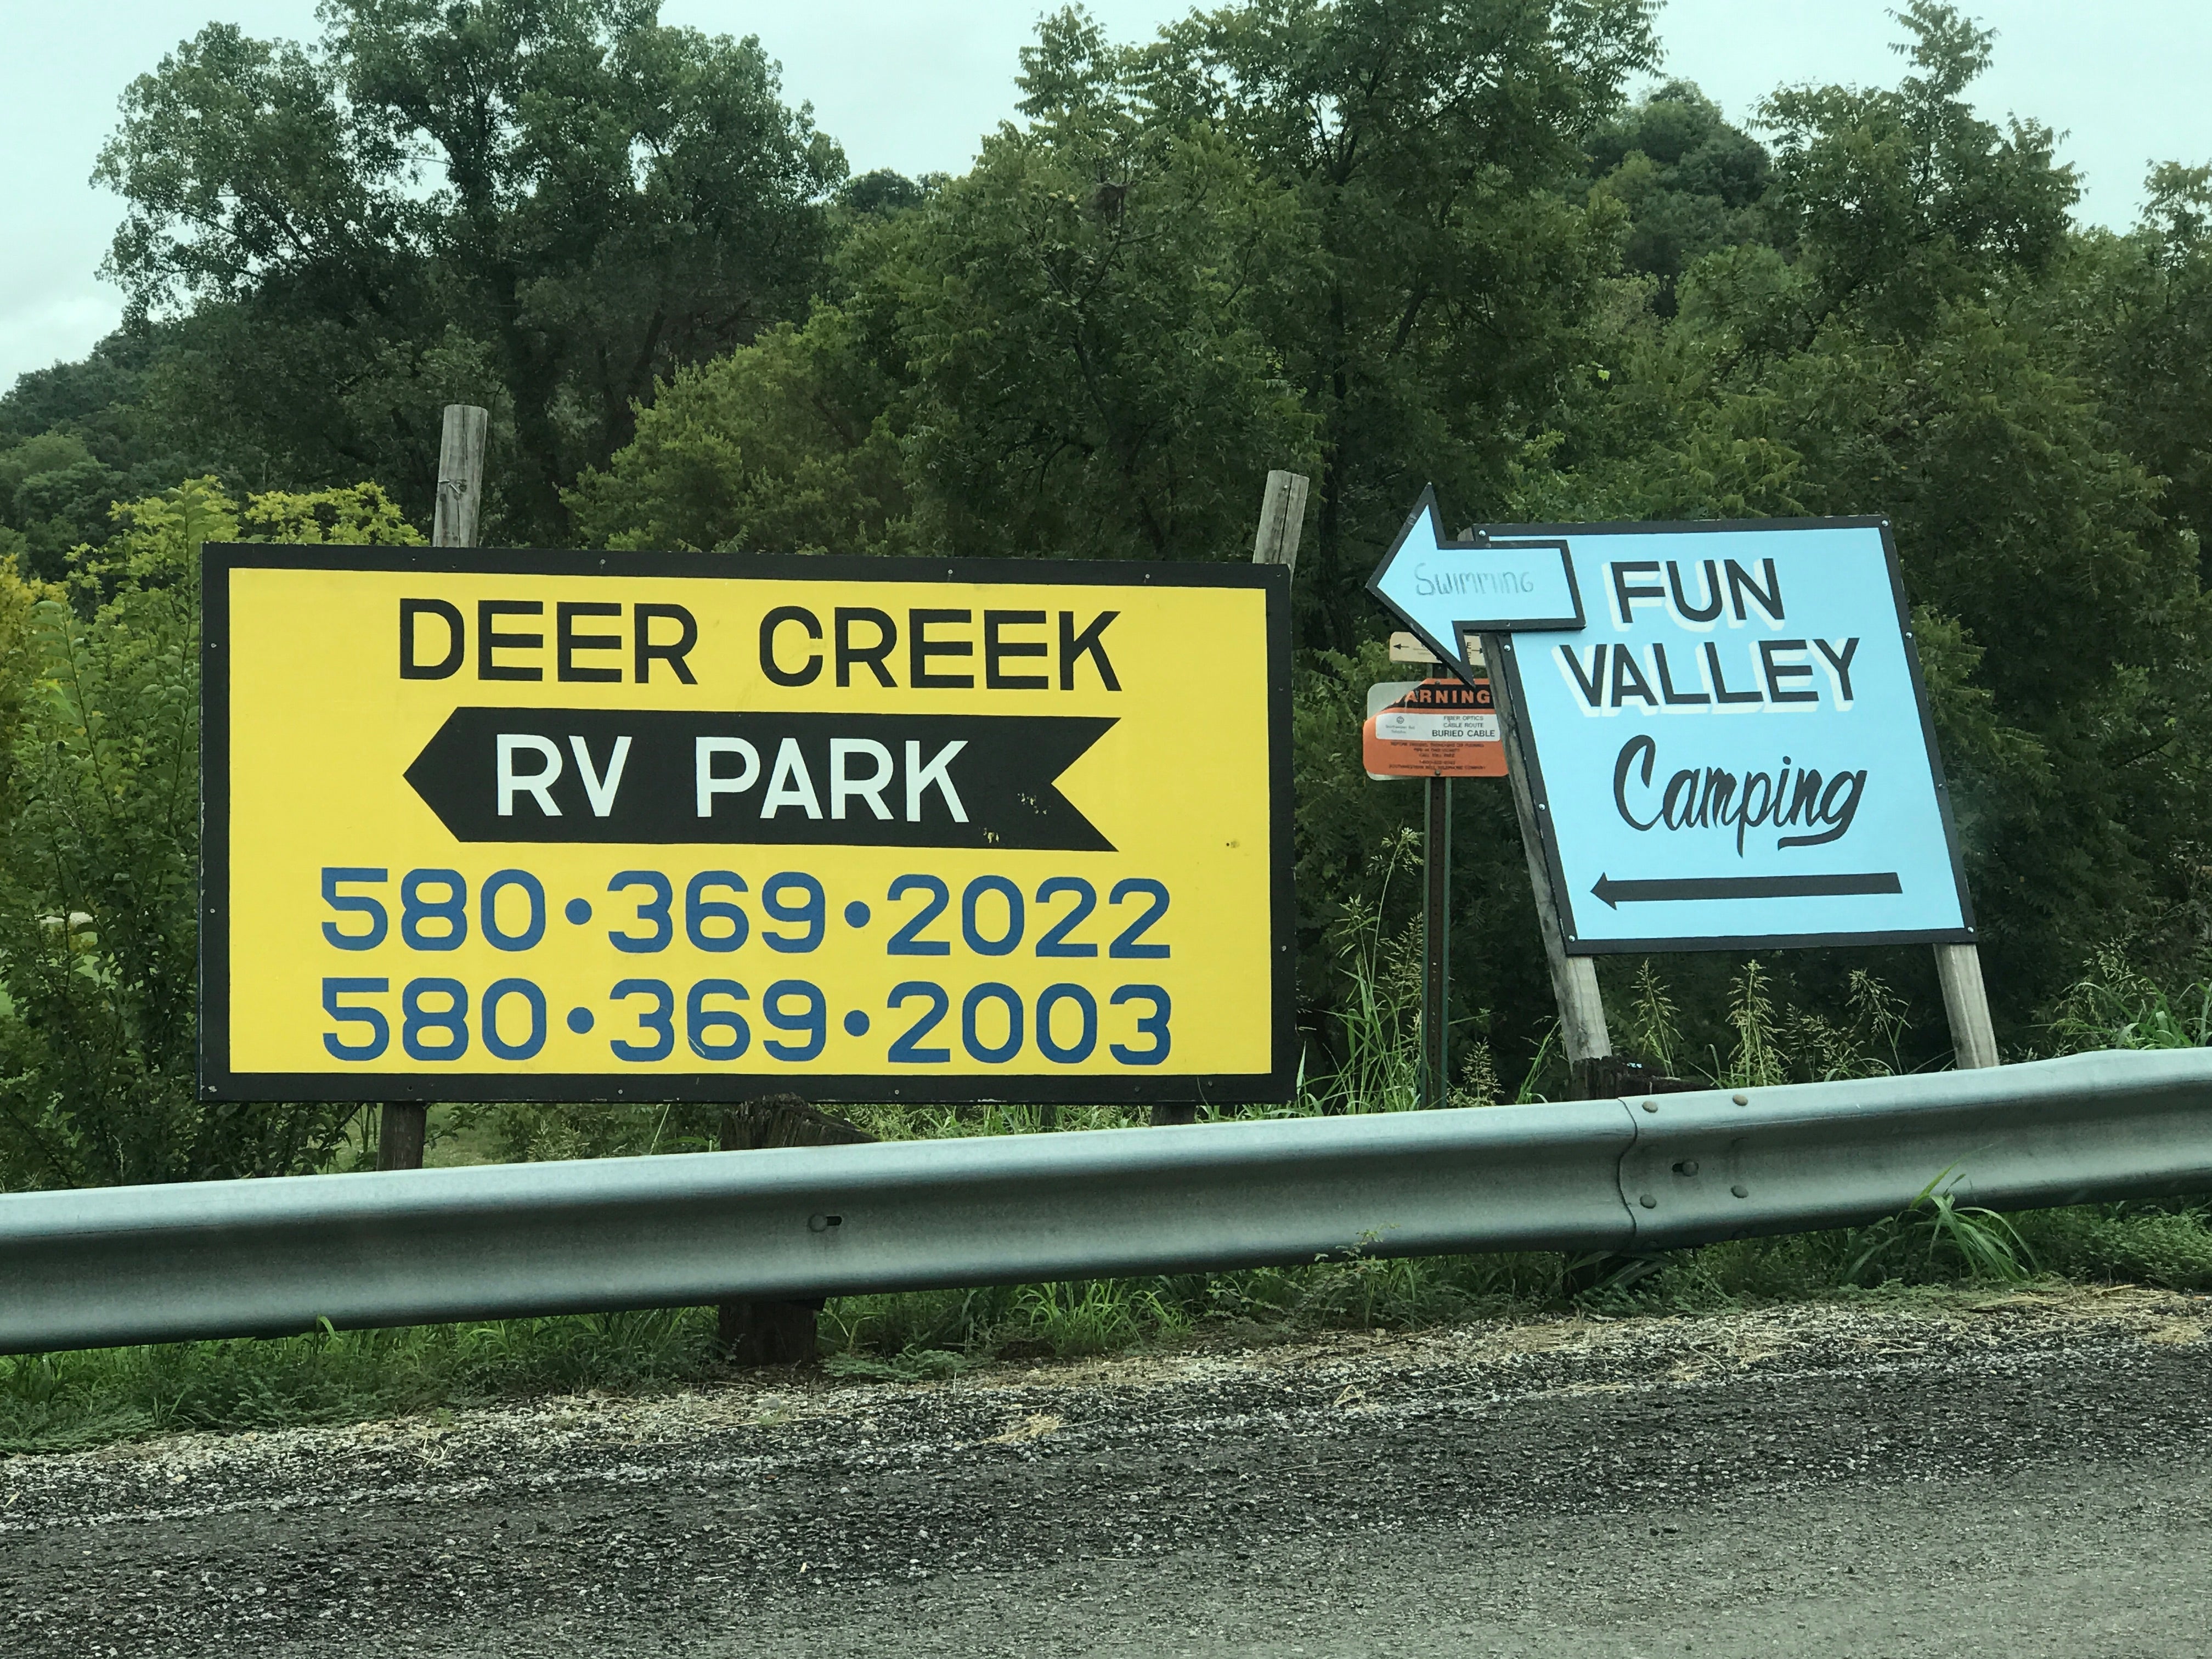 Camper submitted image from Deer creek RV Park - 5